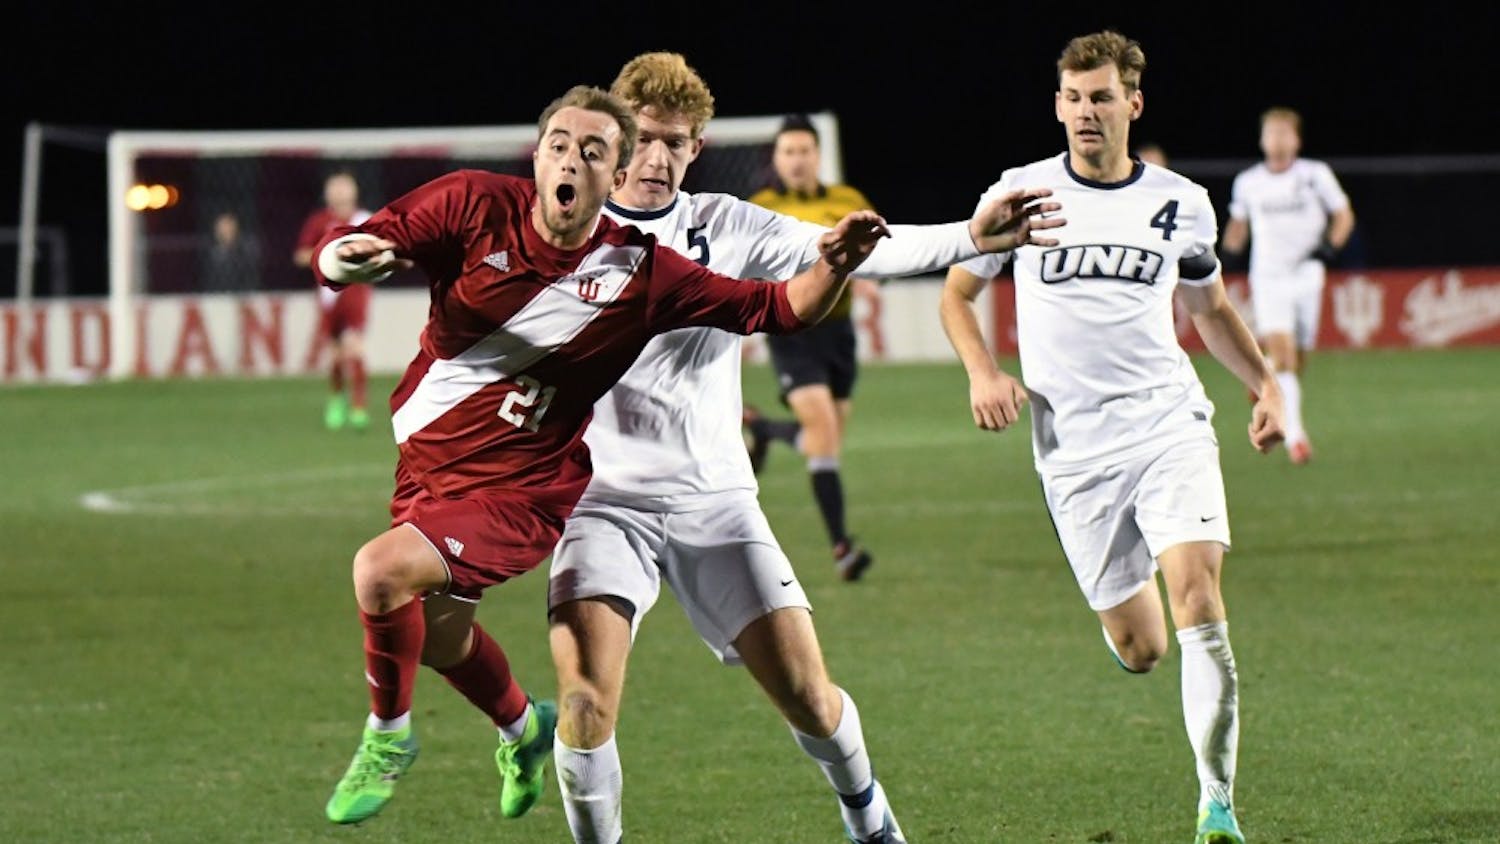 Redshirt freshman defender Spencer Glass is fouled by New Hampshire in the third round of the NCAA tournament Saturday evening at Bill Armstrong Stadium. Junior midfielder Francesco Moore made a penalty kick after the foul to score IU's second goal in their 2-1 win against New Hampshire.